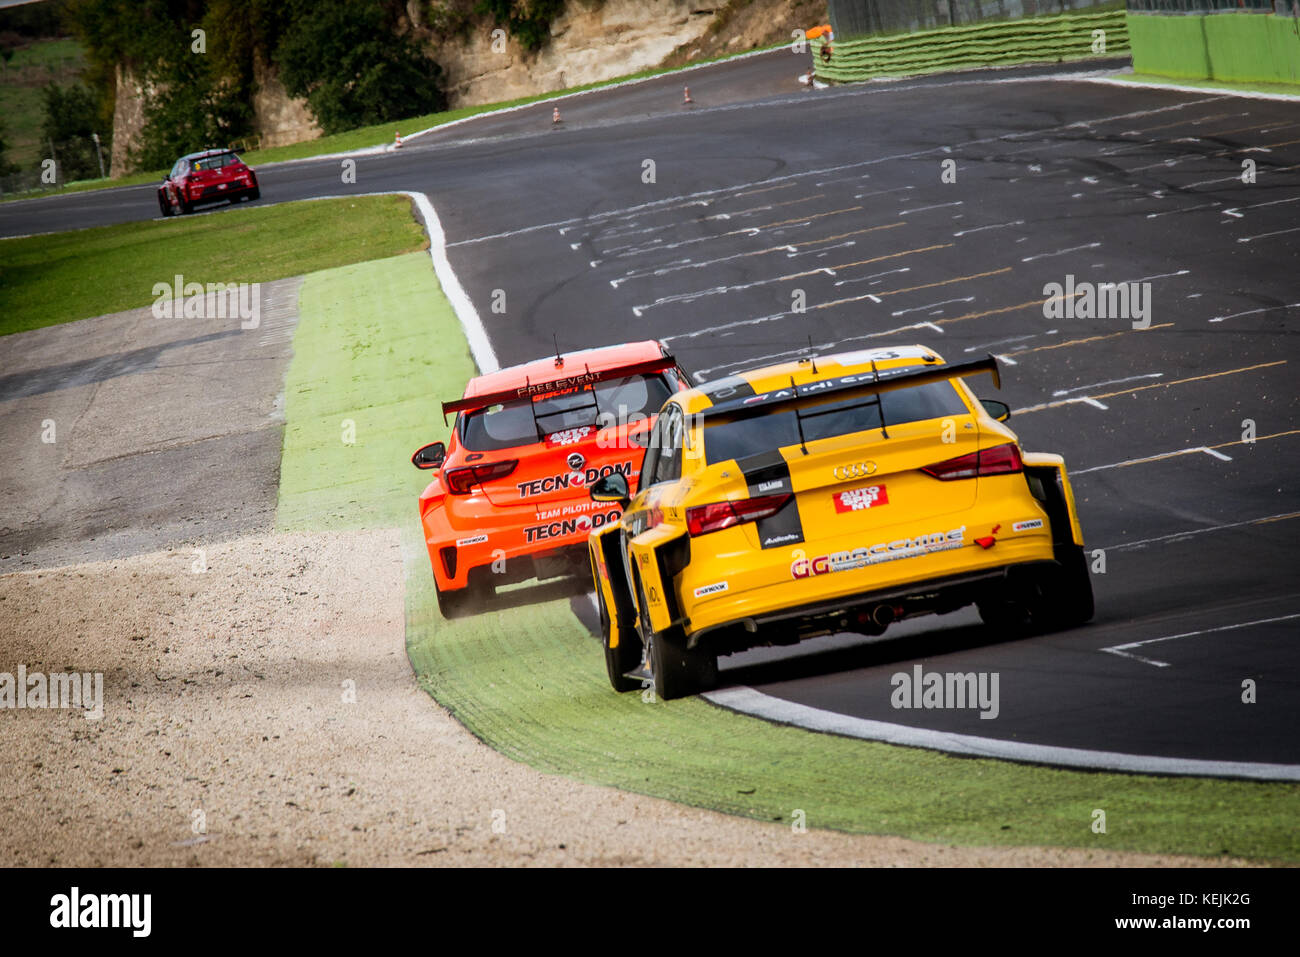 Vallelunga, Italy september 24 2017. Touring Audi rs3 and Opel Astra racing car in action on track during the race, back view exiting turn Stock Photo